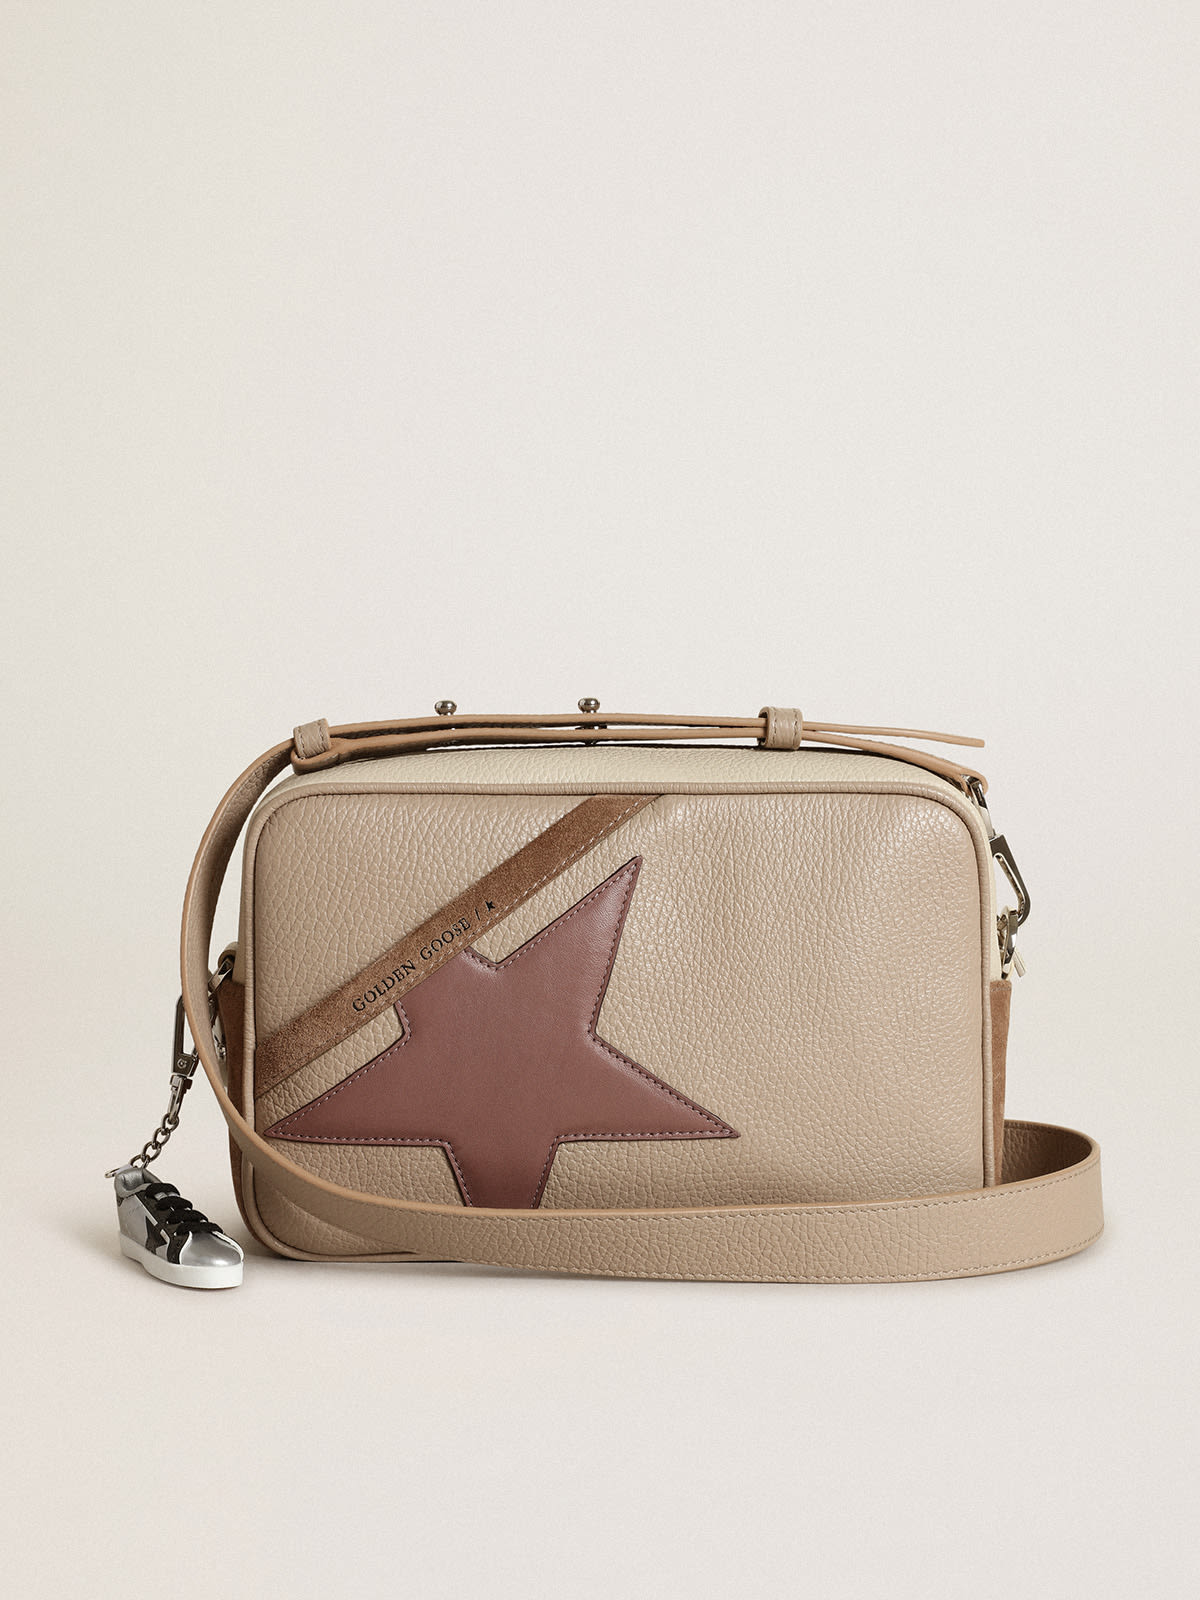 Golden Goose - Women's Star Bag large in off-white hammered leather in 